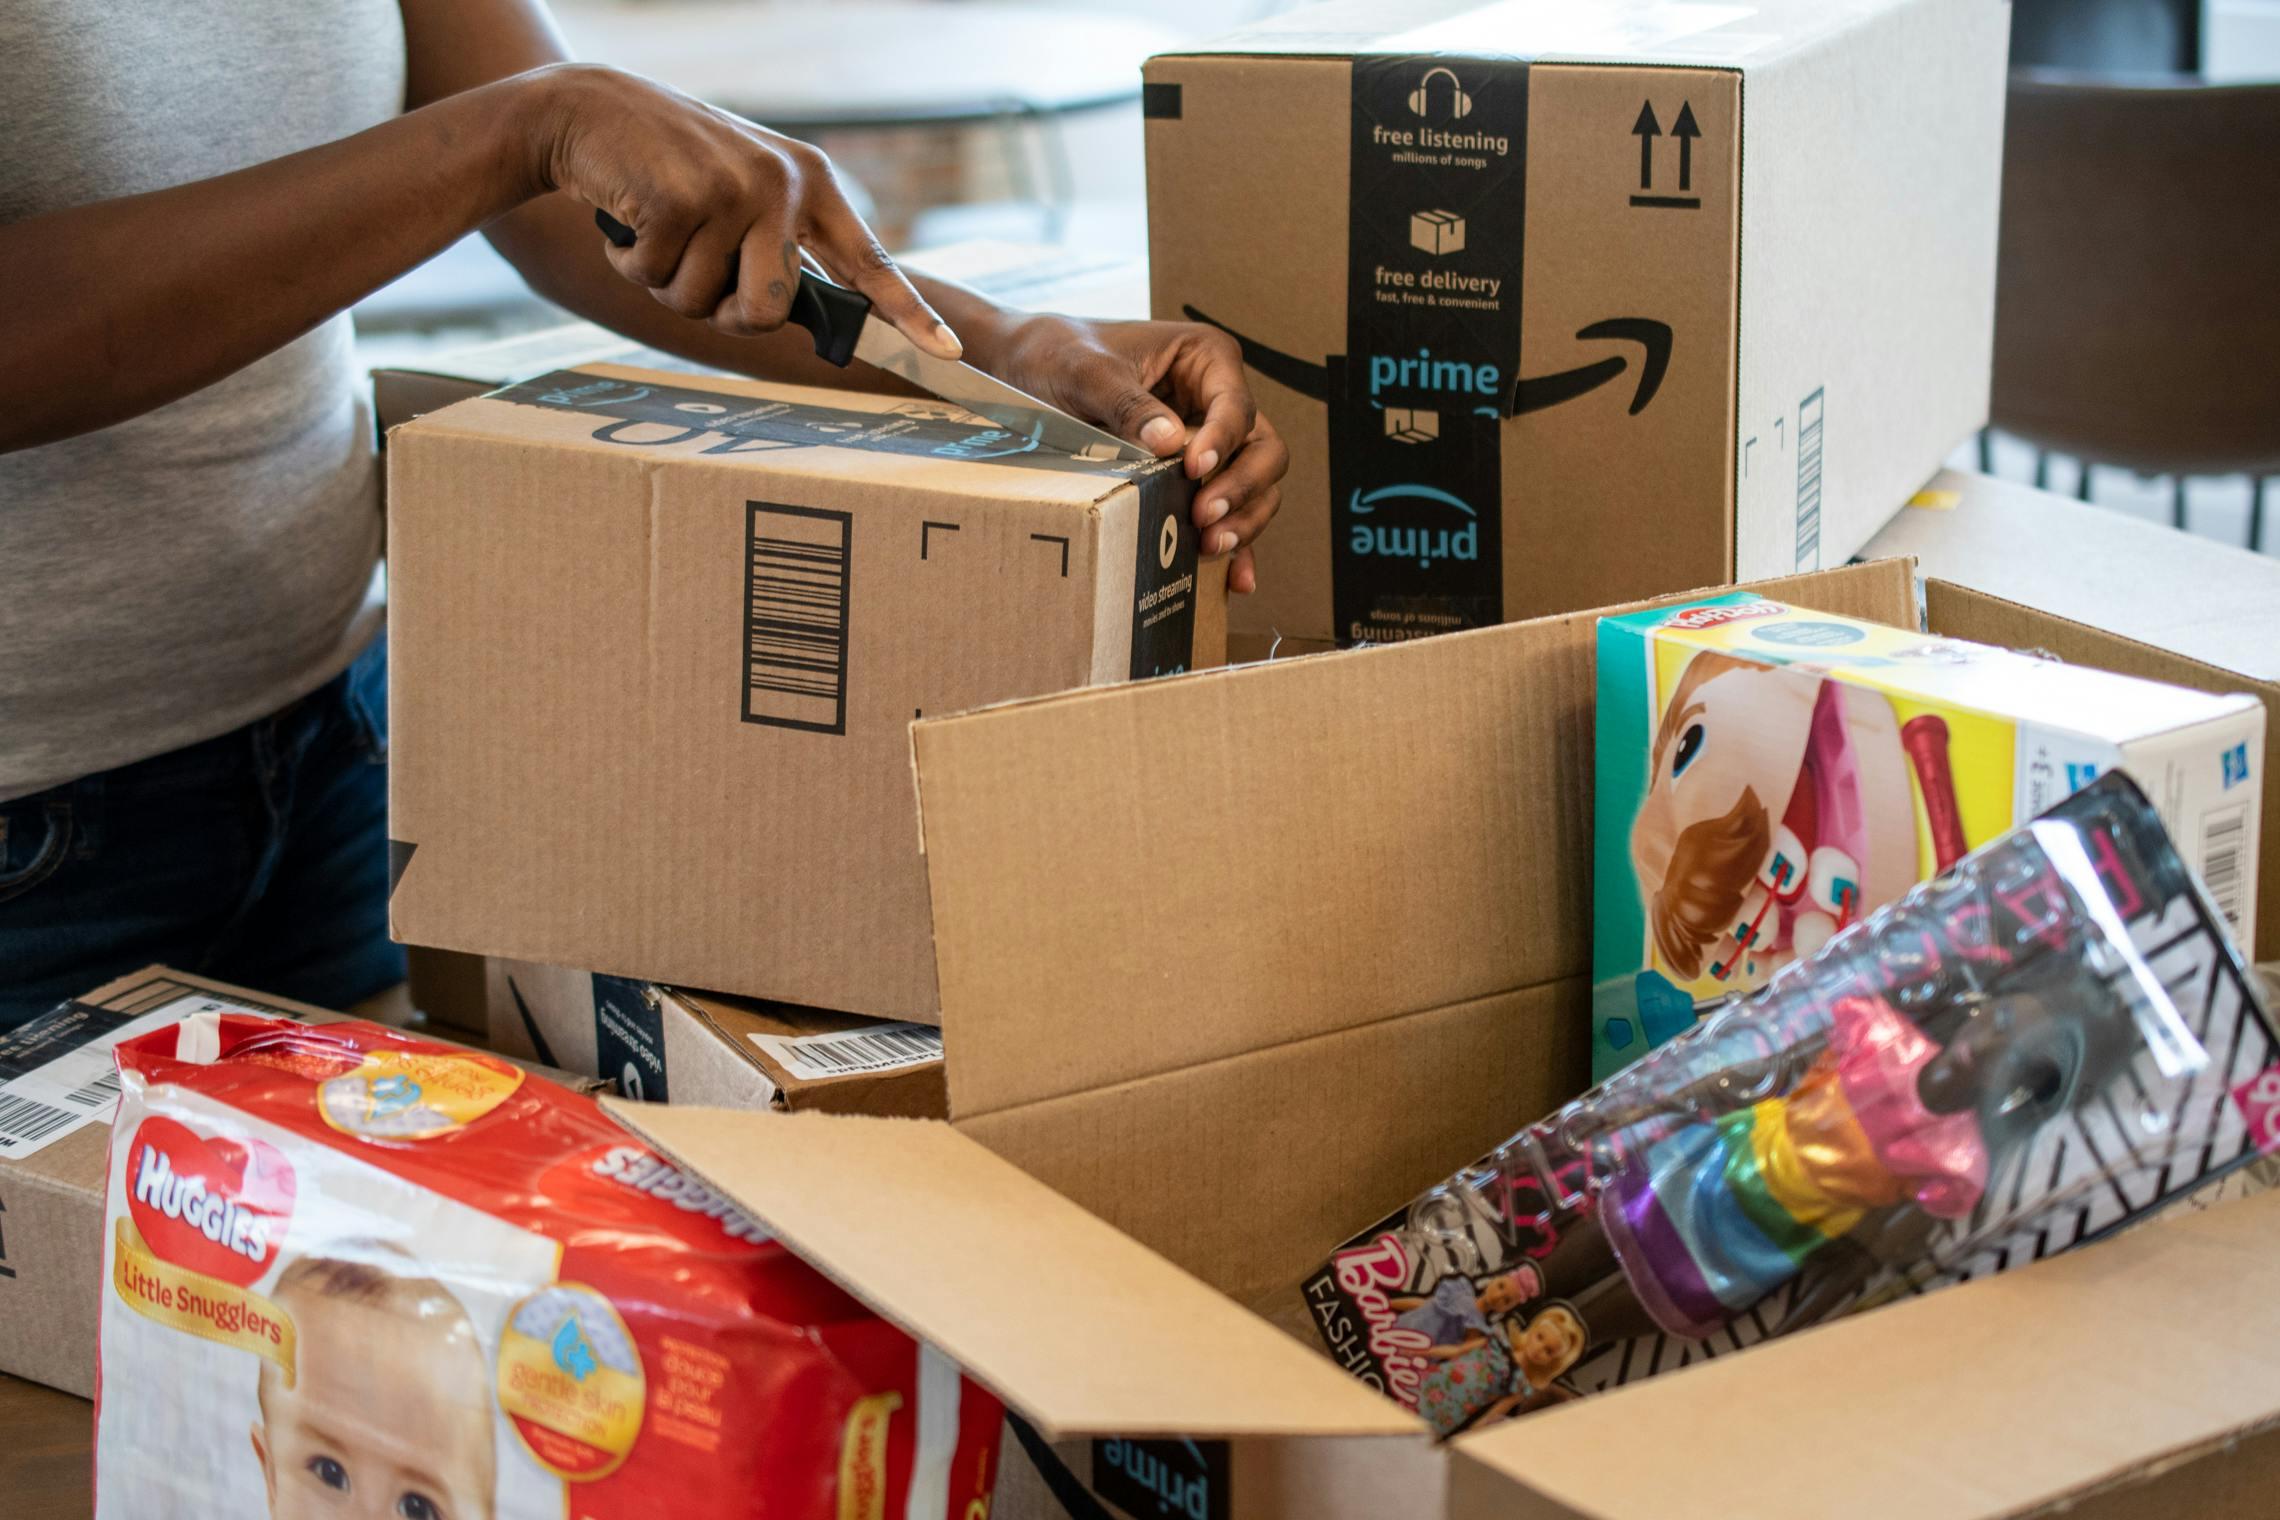 A woman opening an Amazon box with a knife, surrounded by more Amazon boxes with products.